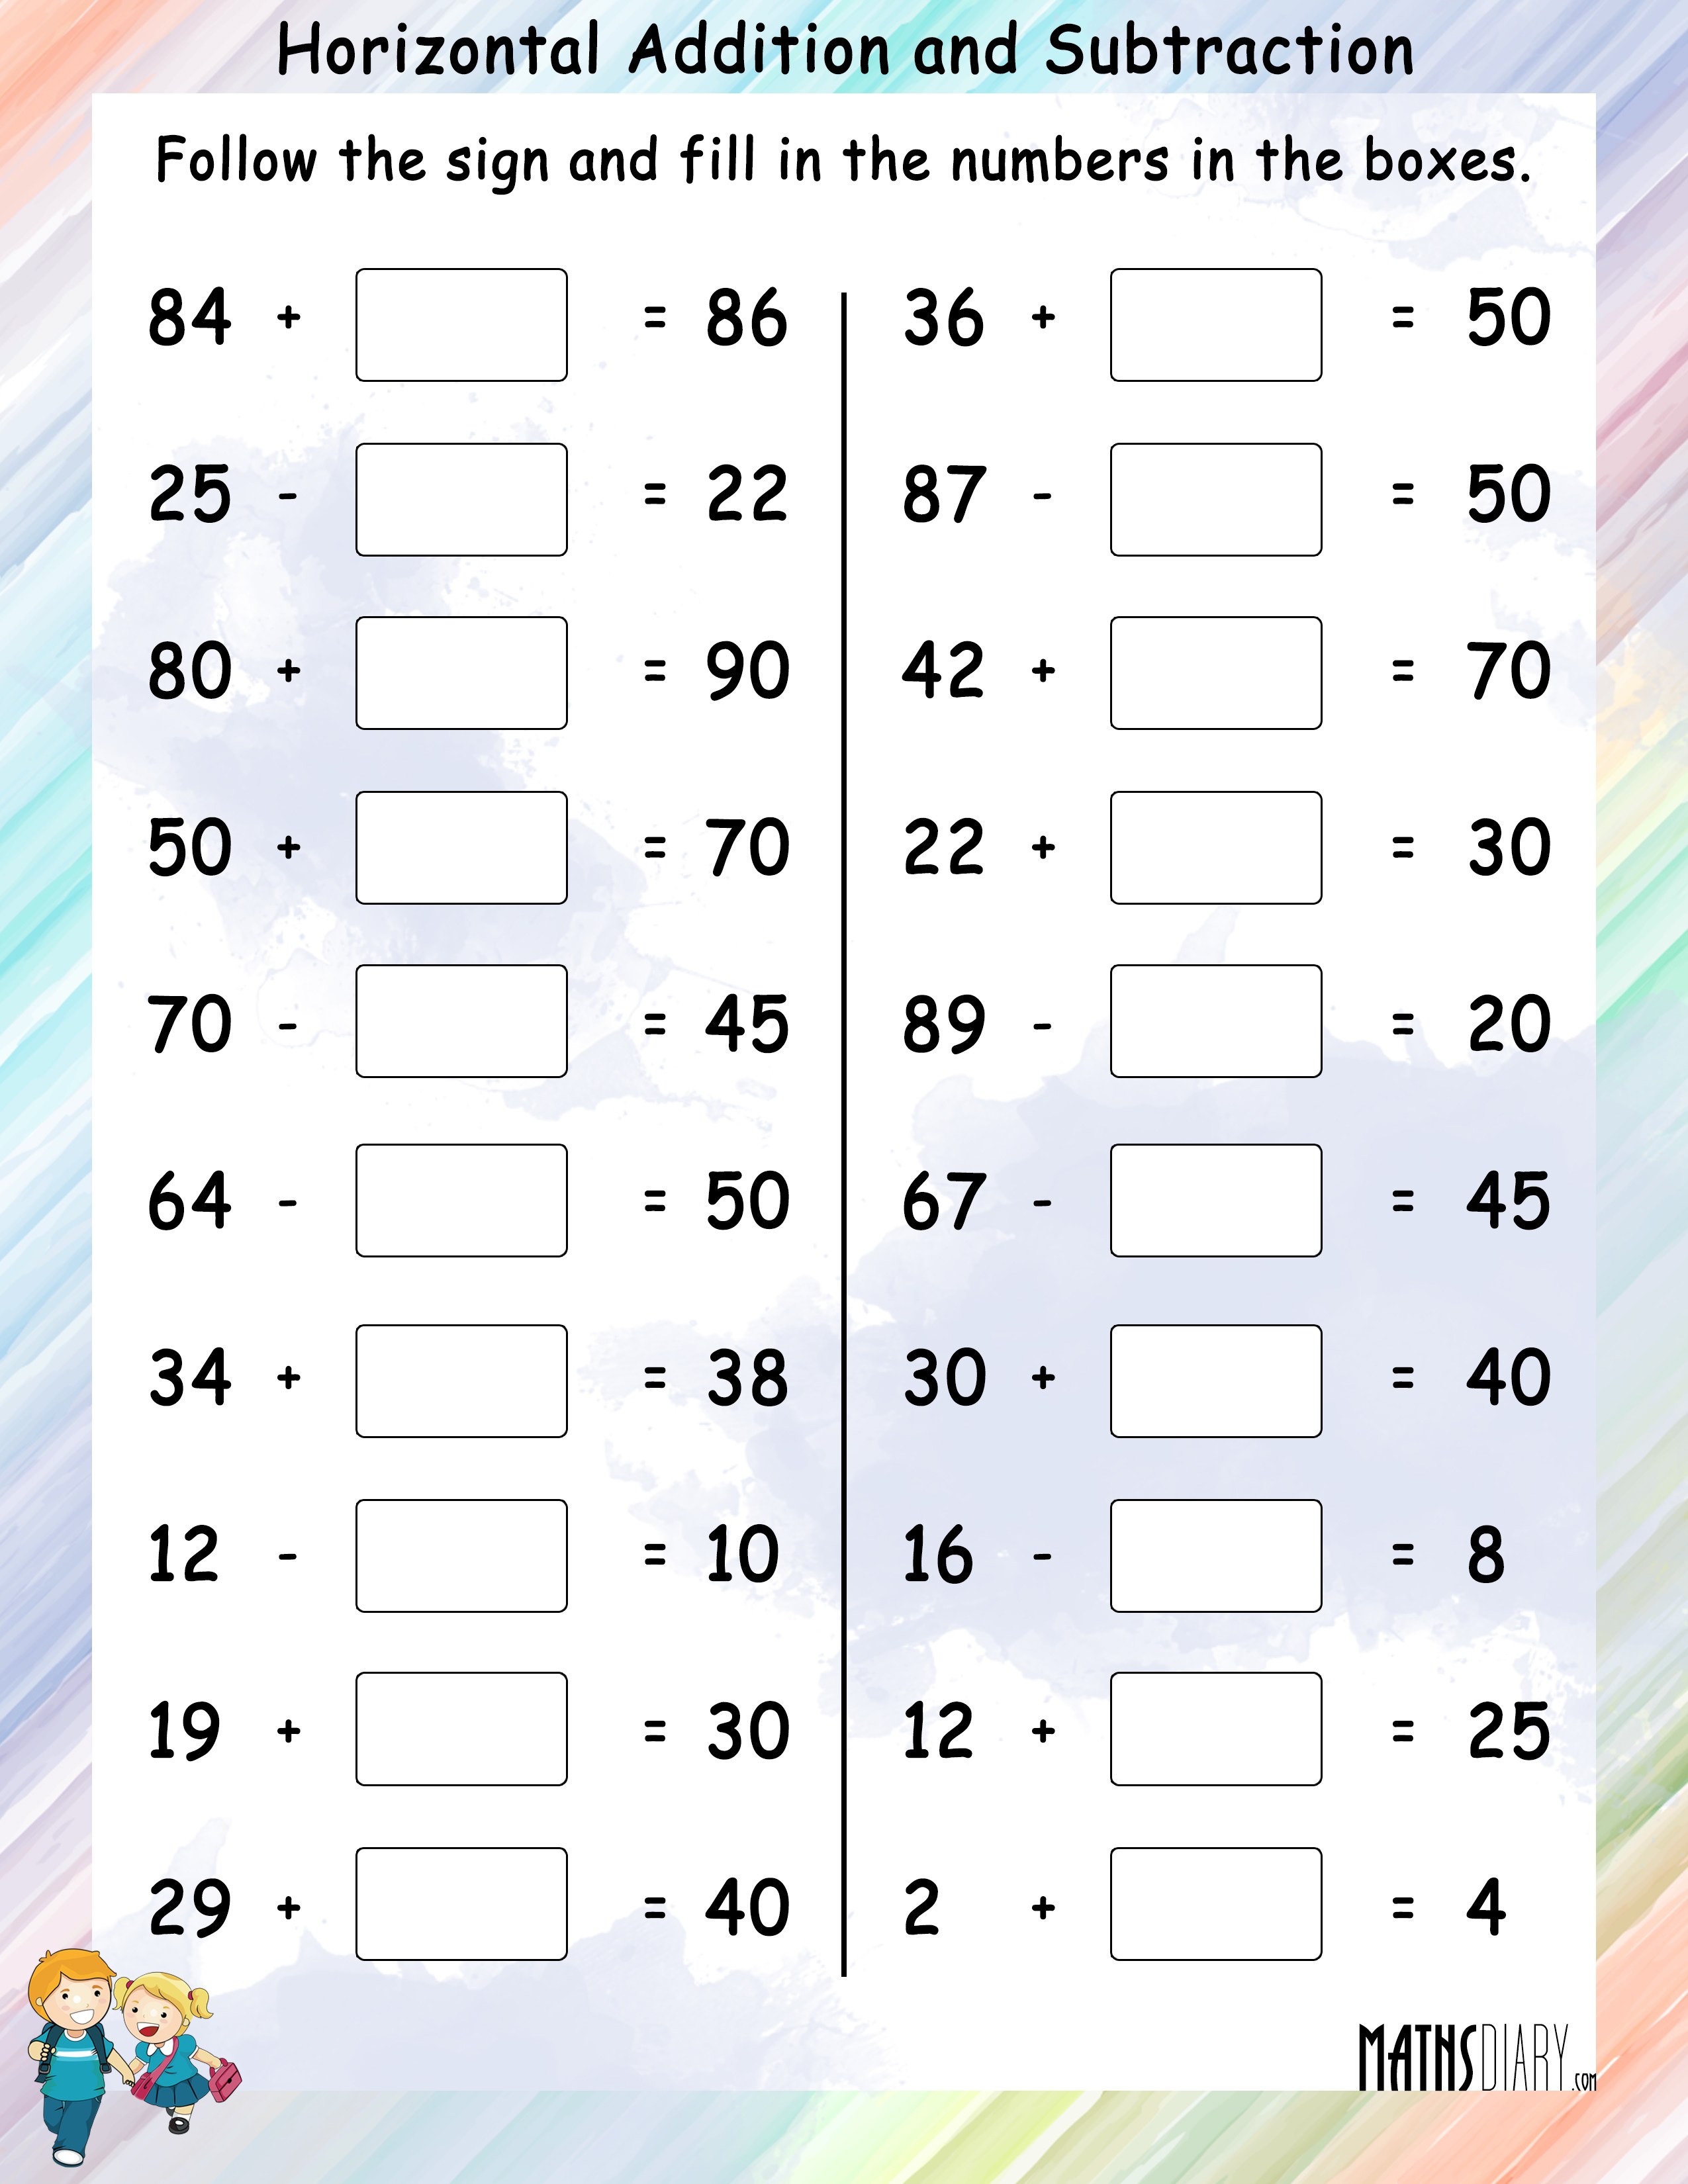 Horizontal Spaces In A Worksheet With Numbers For Headings